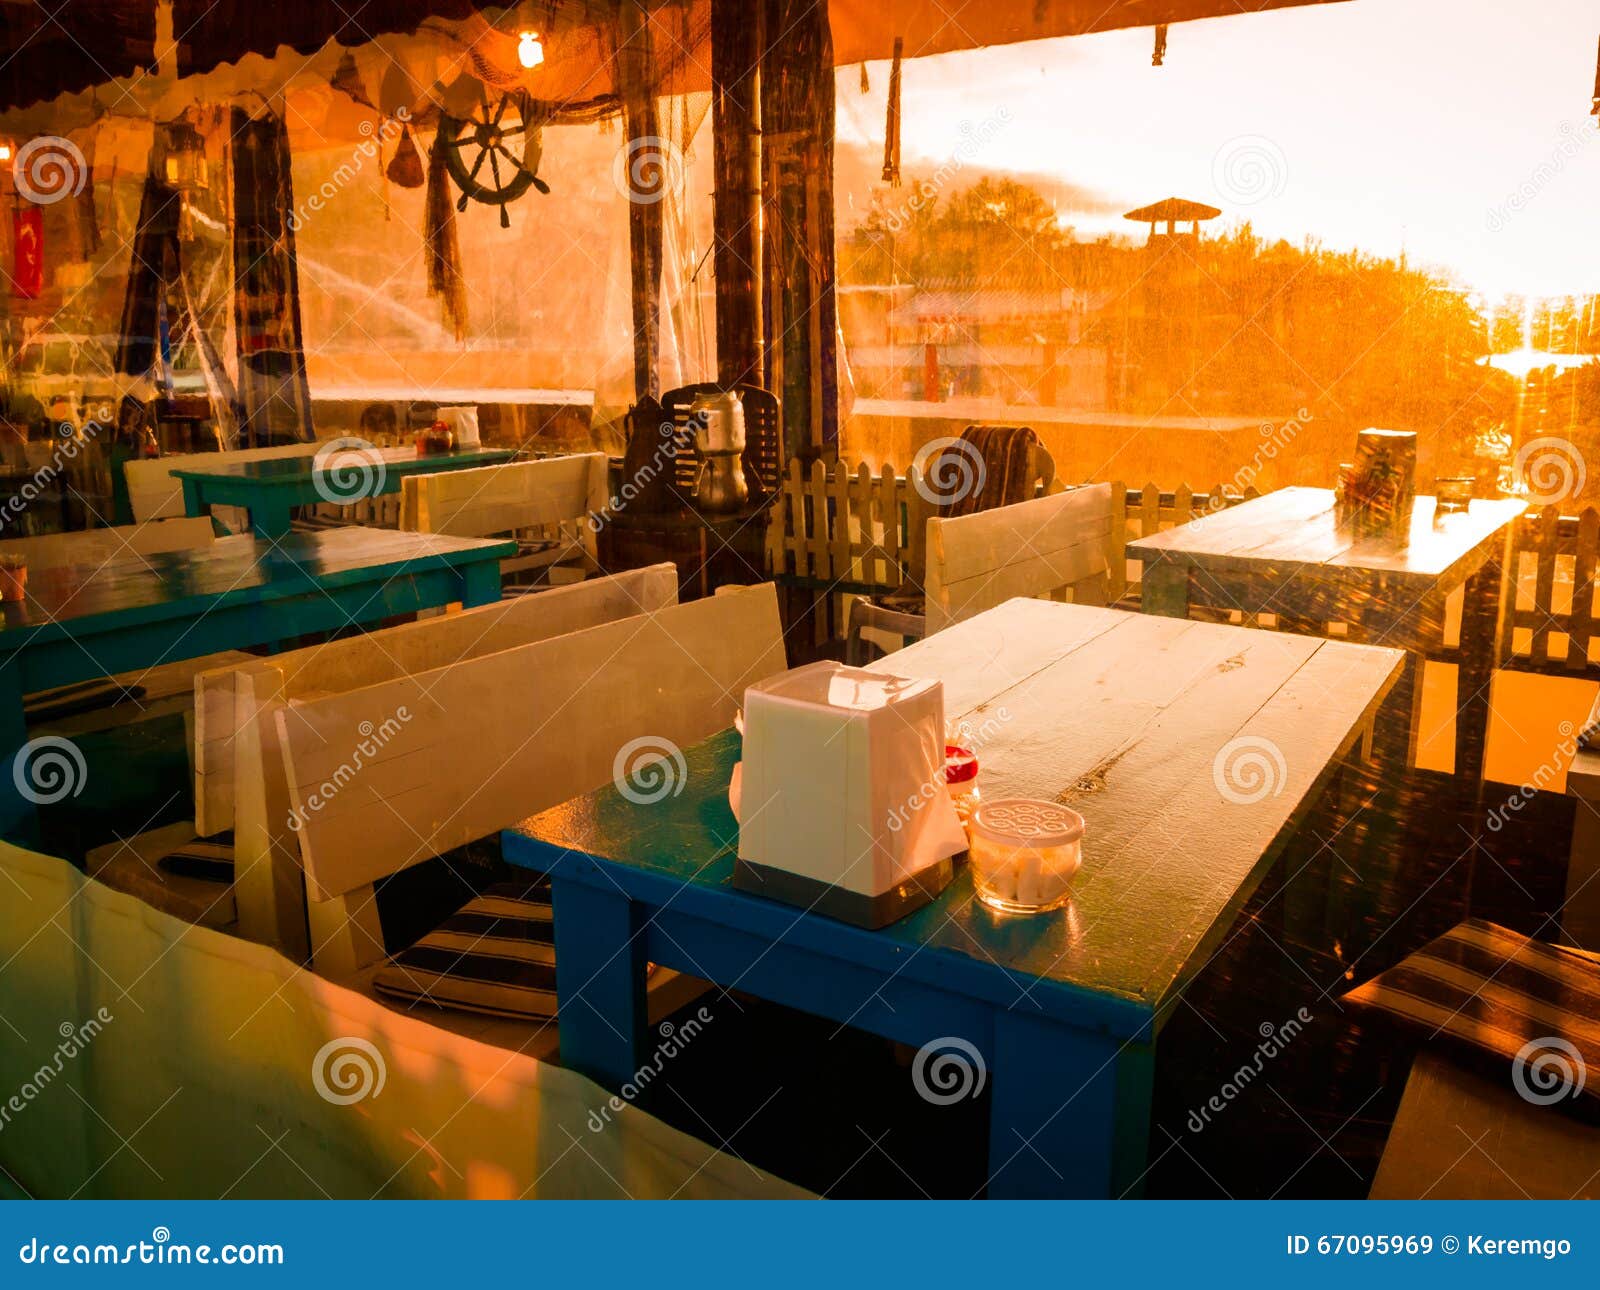 Cozy Turkish Restaurant In The Sunset Stock Image Image Of